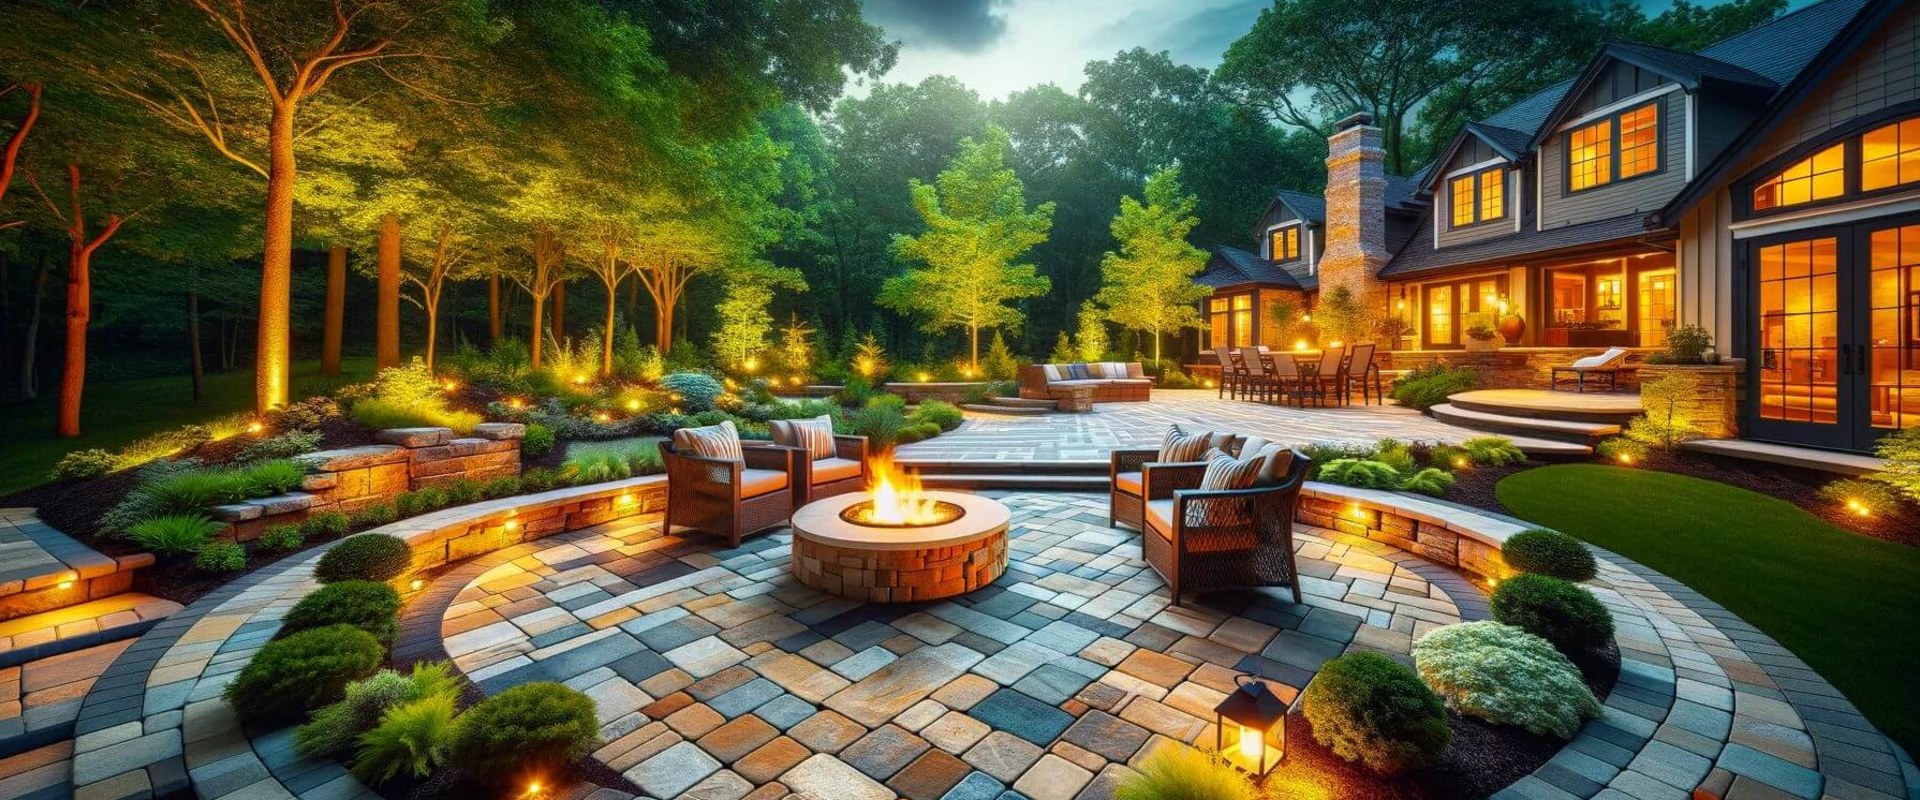 Installing Pathways and Patios: Enhancing Your Outdoor Living Space